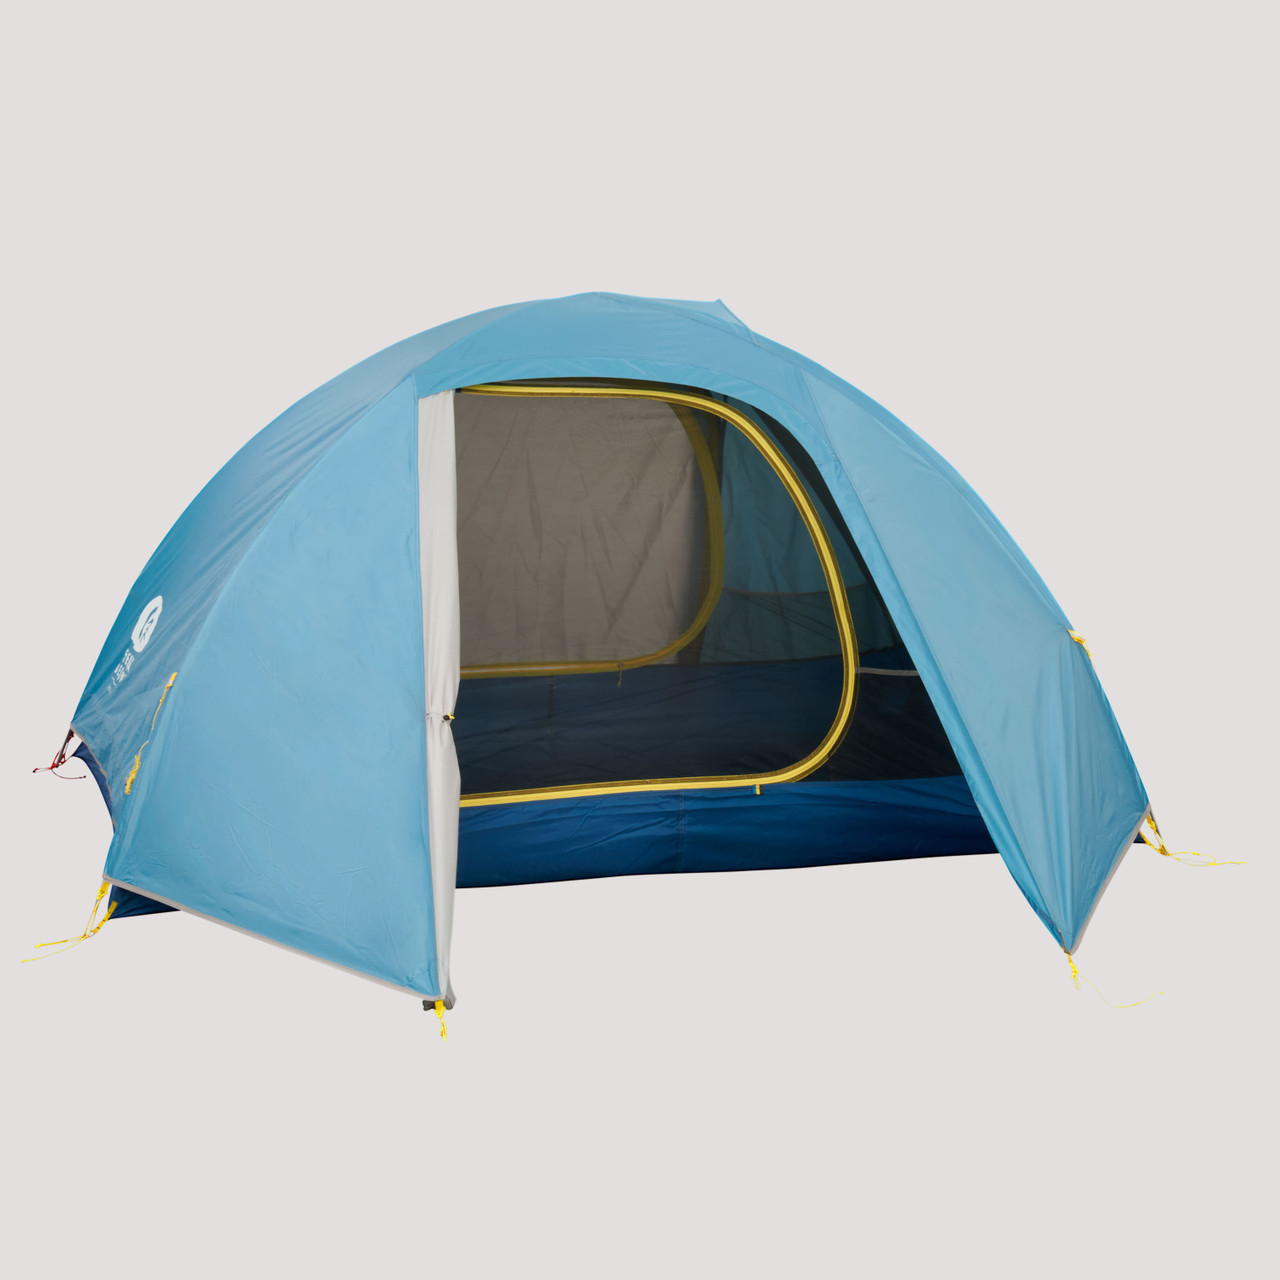 Full Moon 2-Person Tent